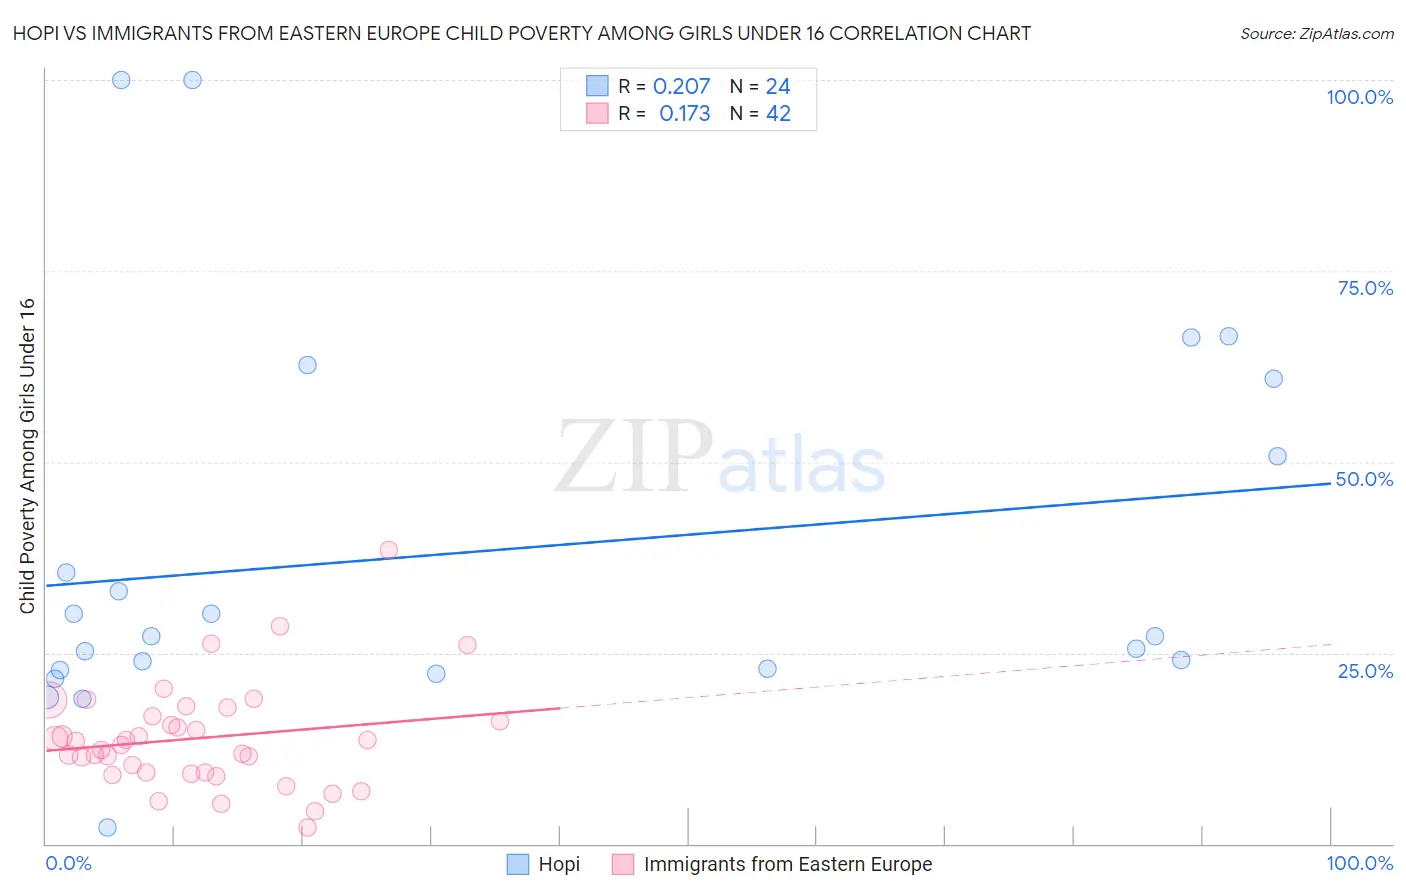 Hopi vs Immigrants from Eastern Europe Child Poverty Among Girls Under 16